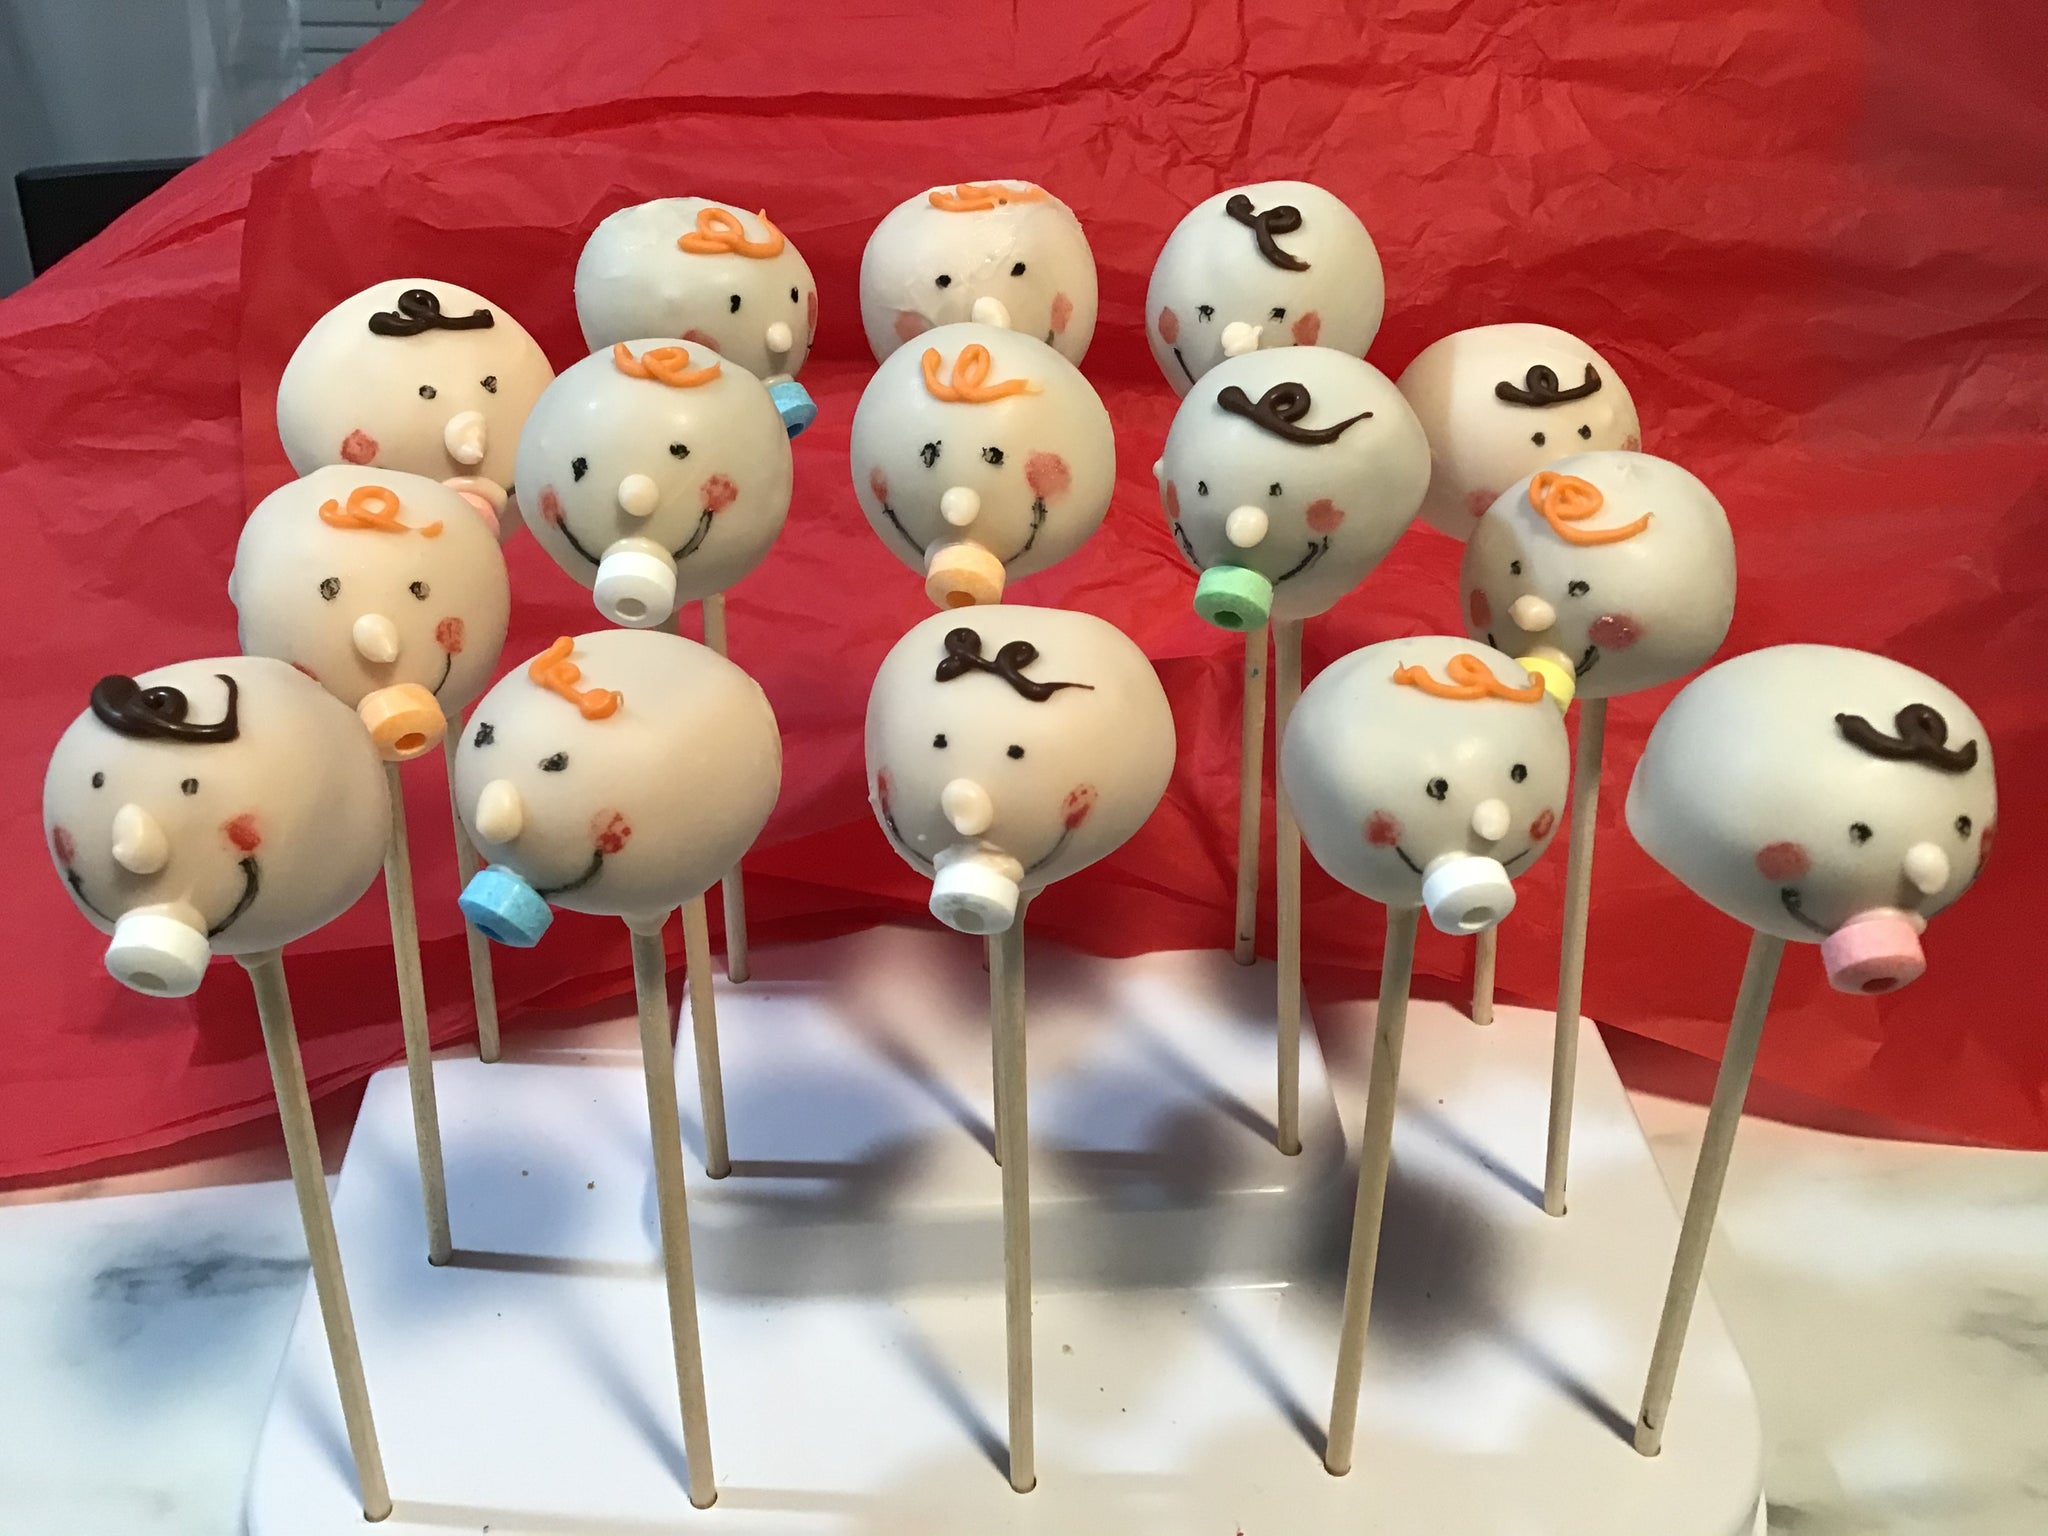 12 x Cake Pop Sticks, Custom Age or Word, Cupcake or Cake Pop Toppers,  Cupcakes, Cakepops, Party Decorations, Cake Pops, Made in Australia